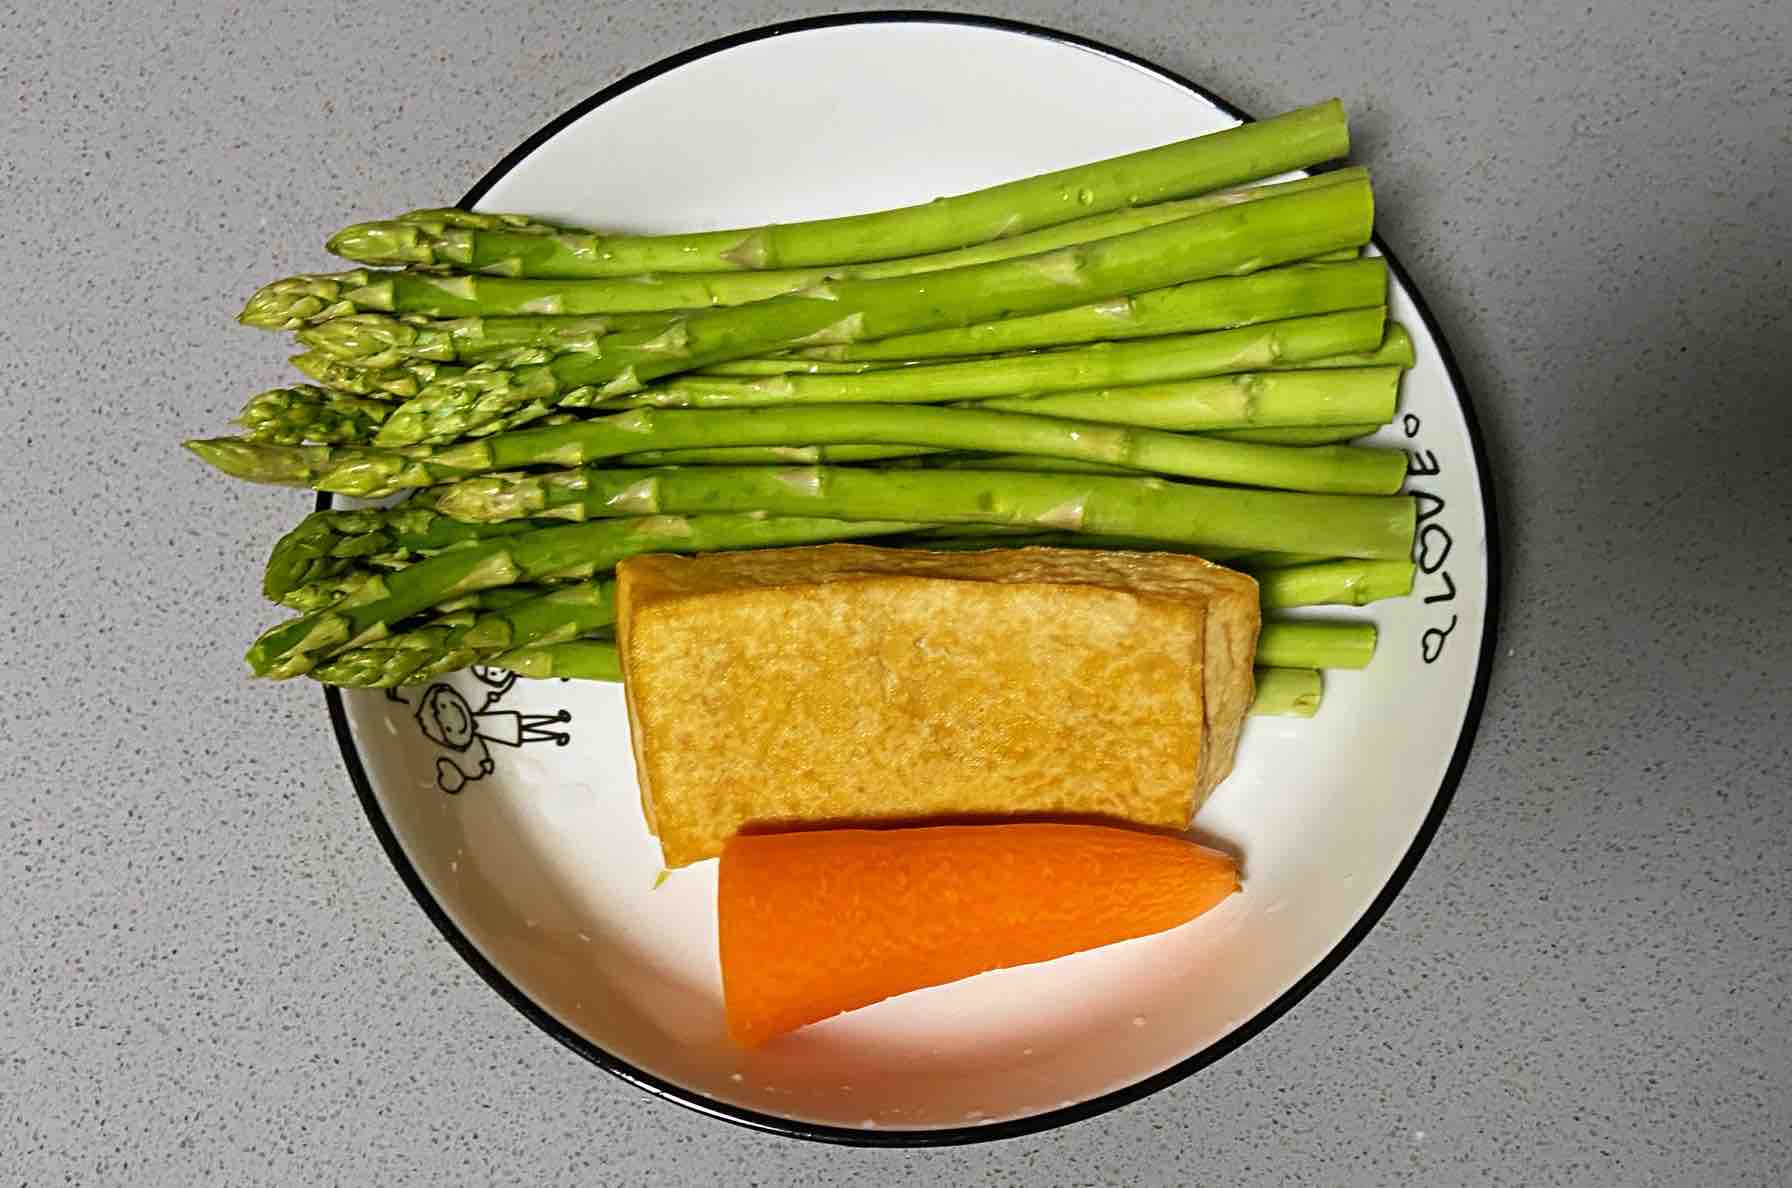 [recipe for Pregnant Women] Asparagus is Fried and Fragrant, Refreshing and Delicious, Pregnancy recipe